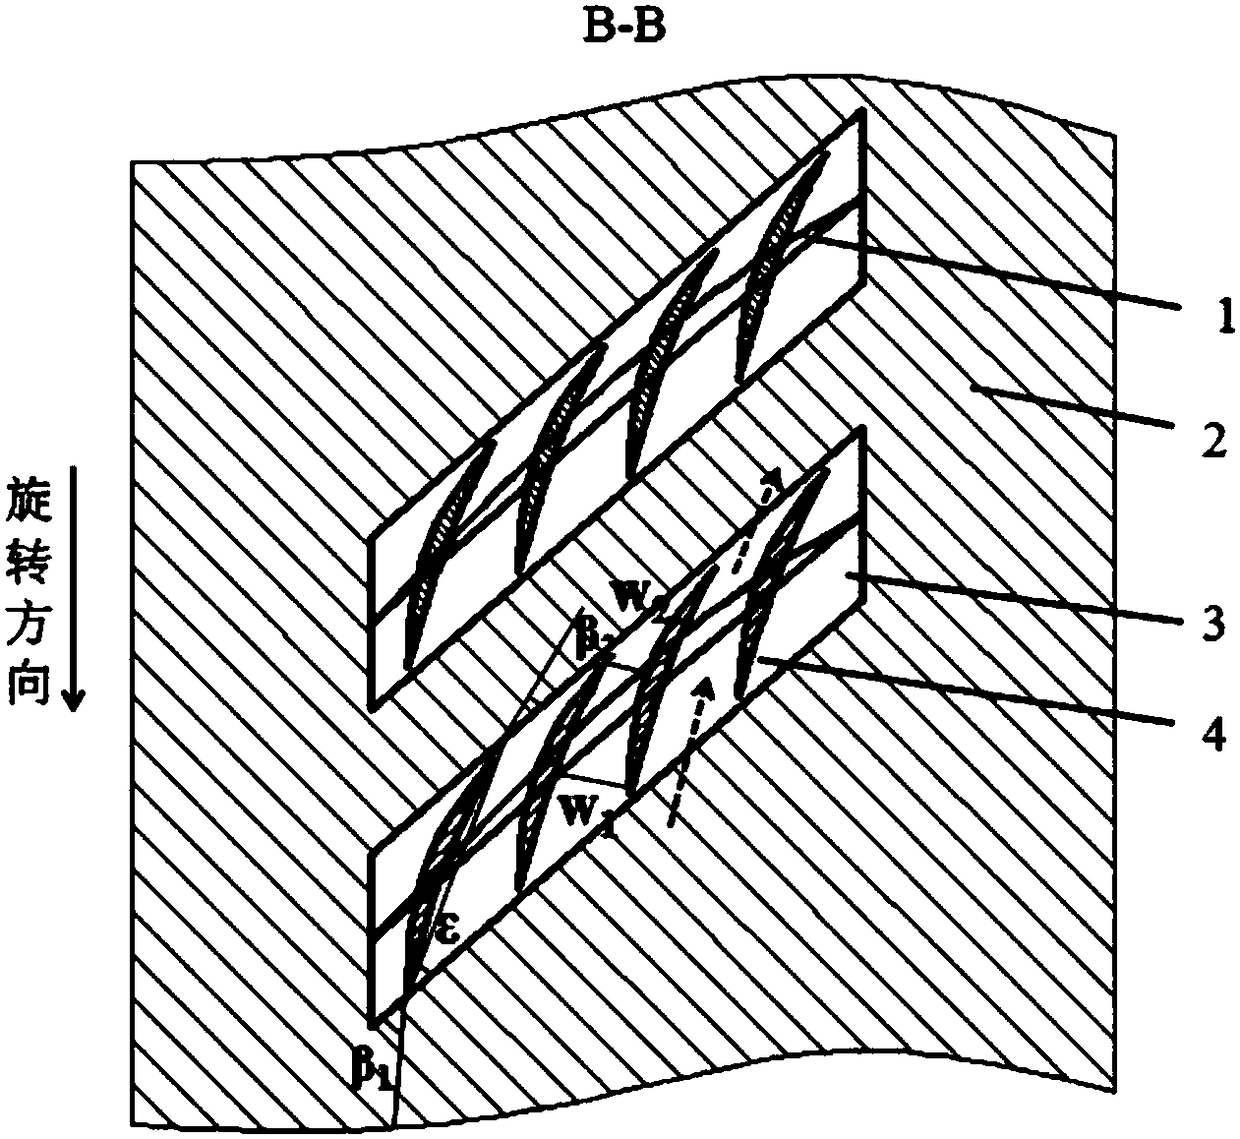 A treatment method and device for a compressor chord groove deflector casing